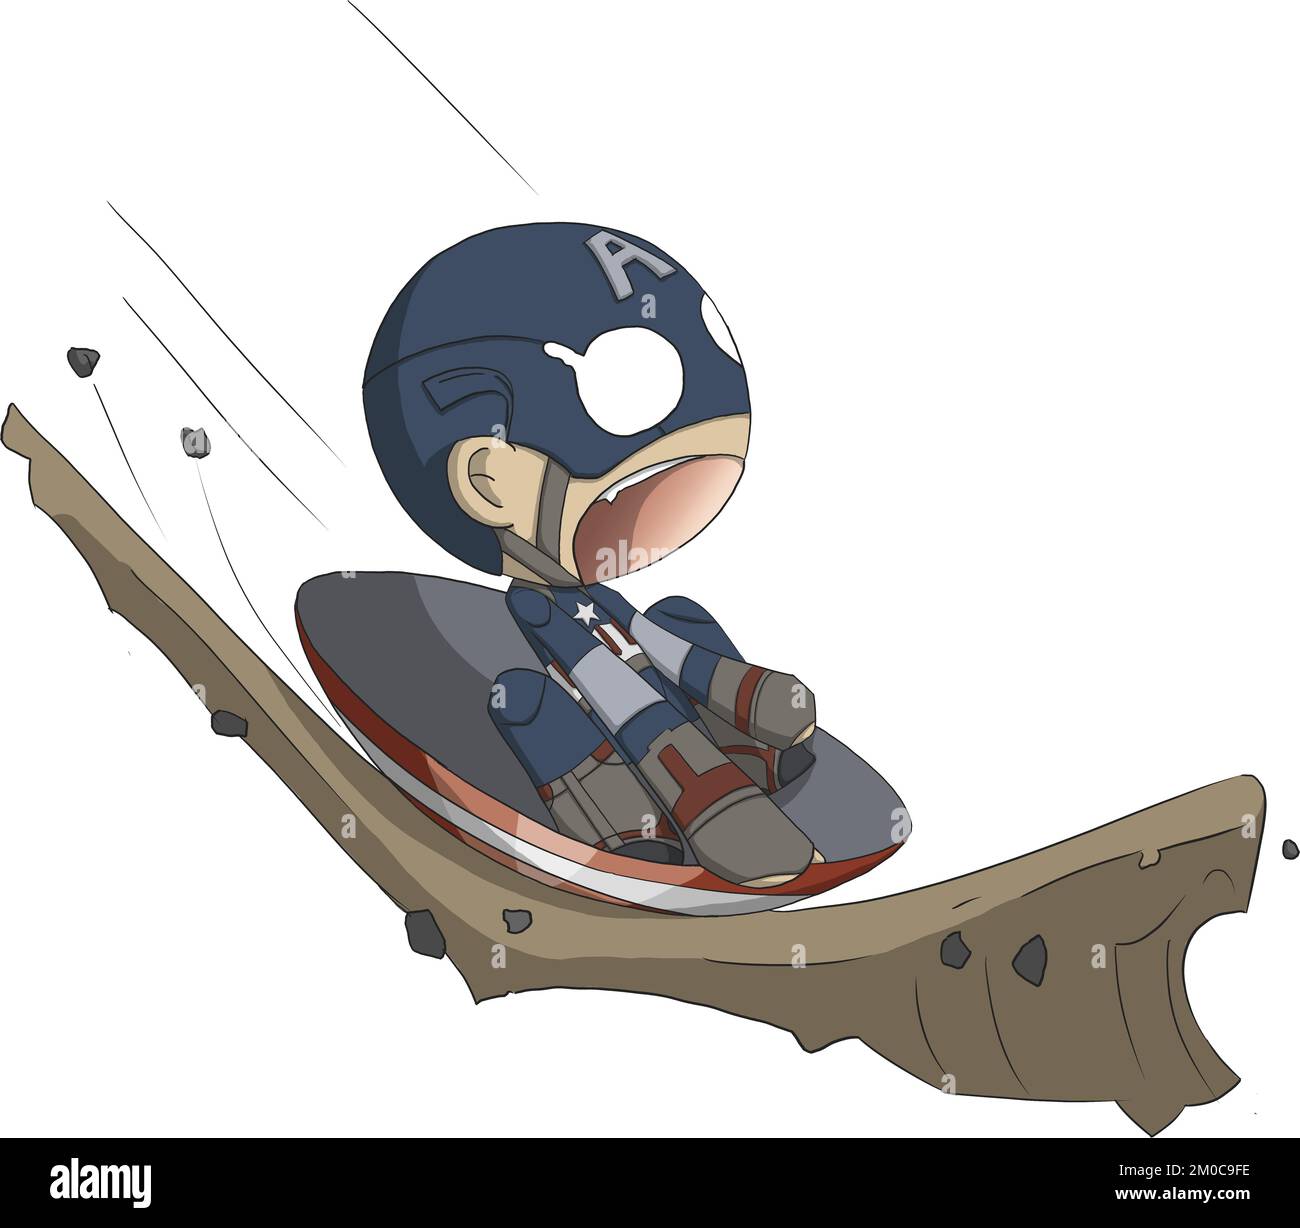 Captain america Cut Out Stock Images & Pictures - Alamy